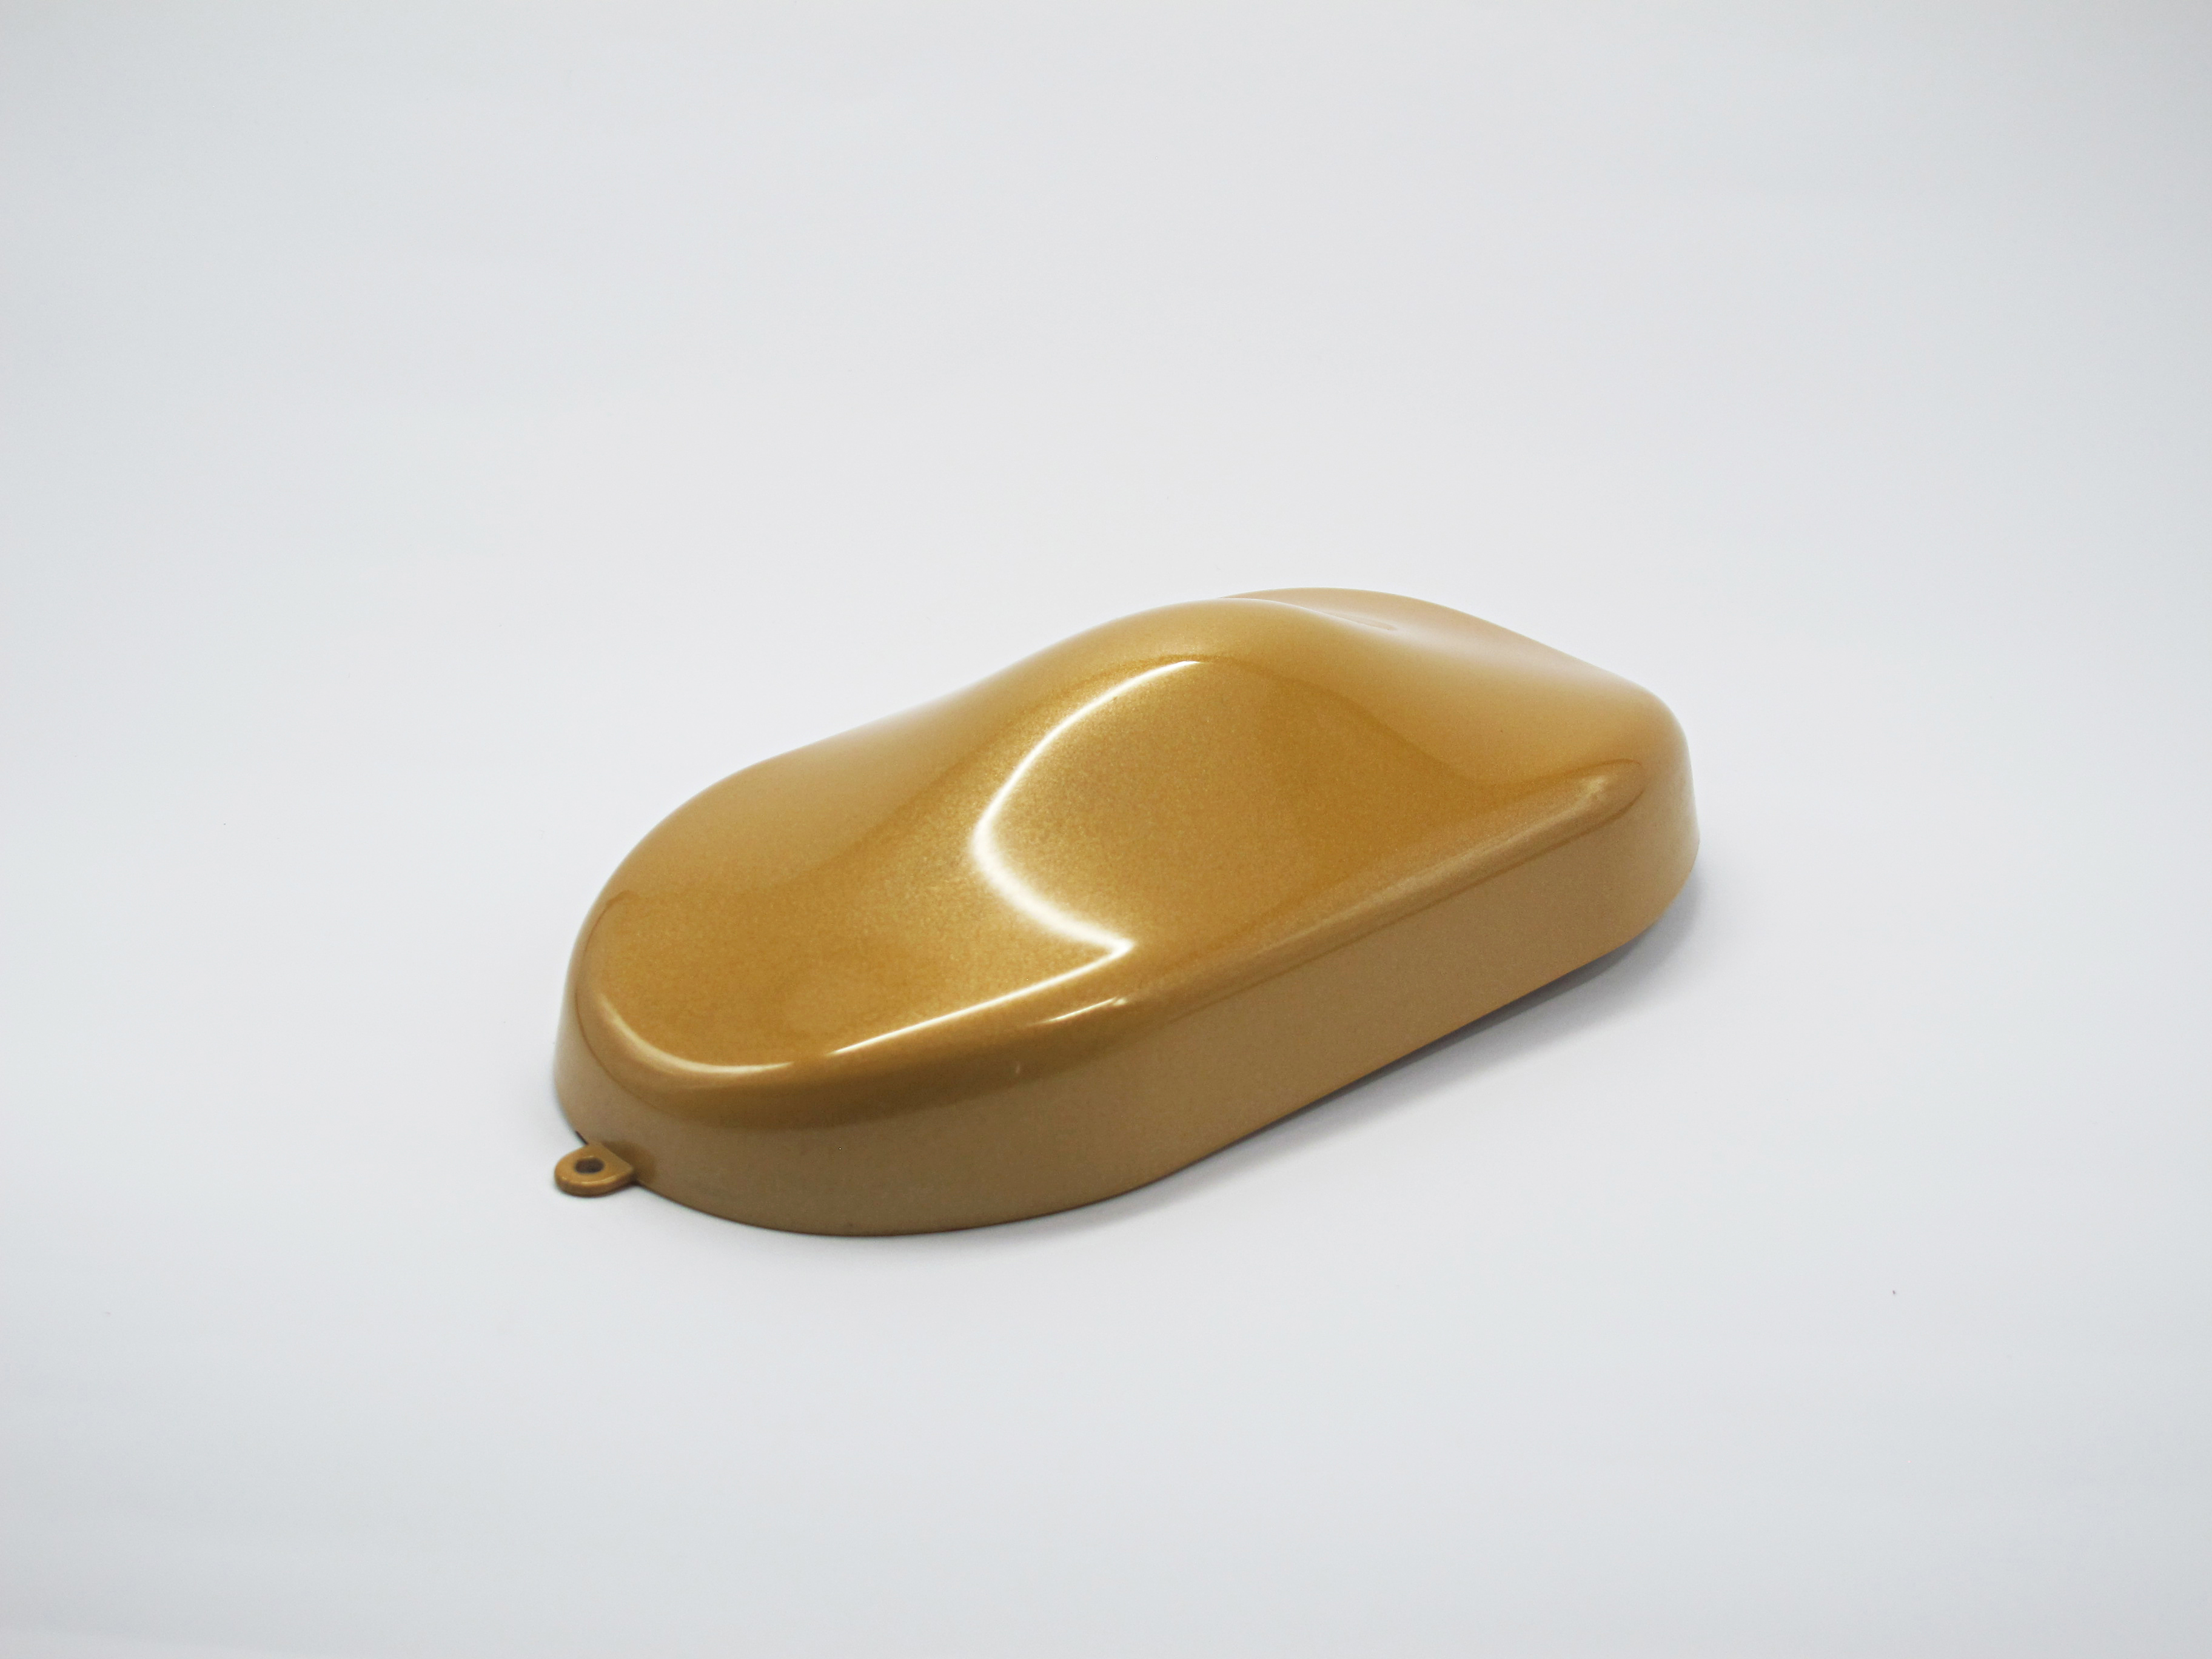 A 311 Gold Yellow Solid Color with 50 Percent Metallic Coarse